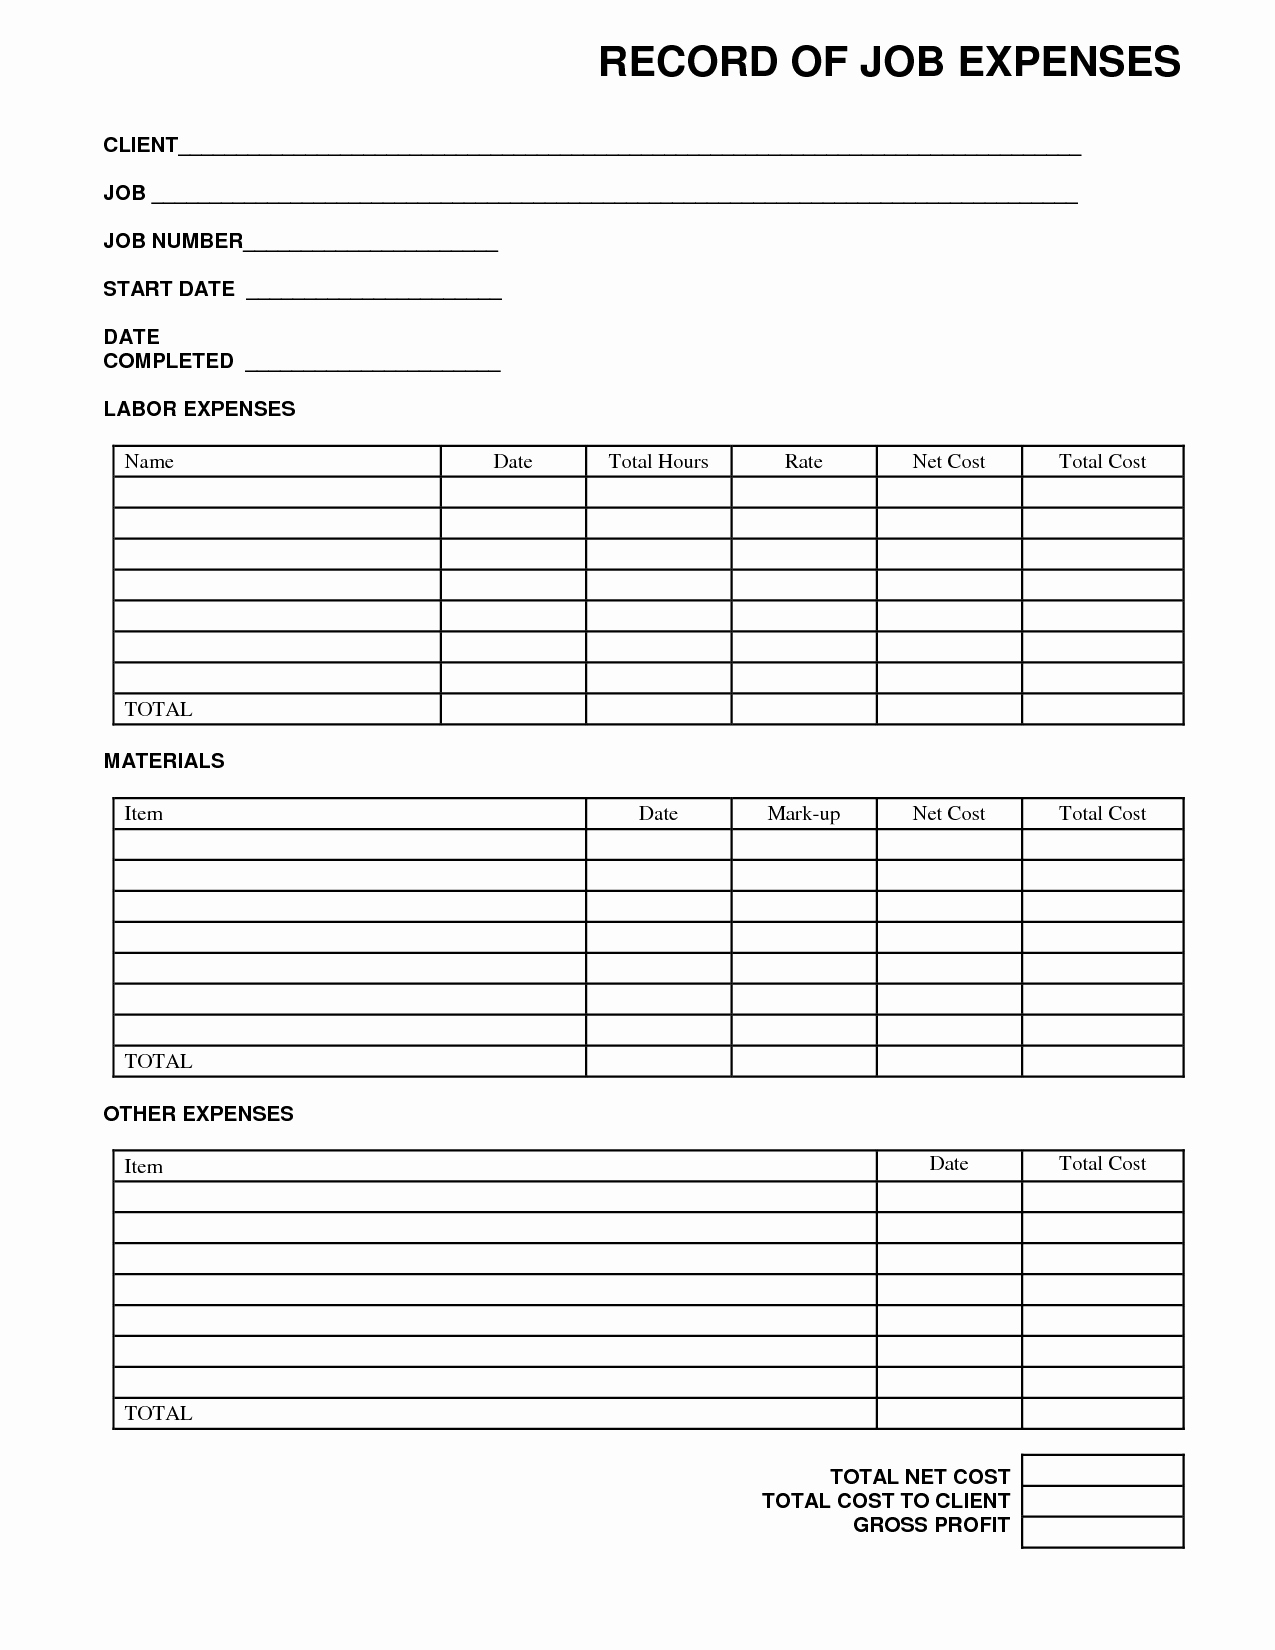 Expenses form Template Free Luxury Job Expense form